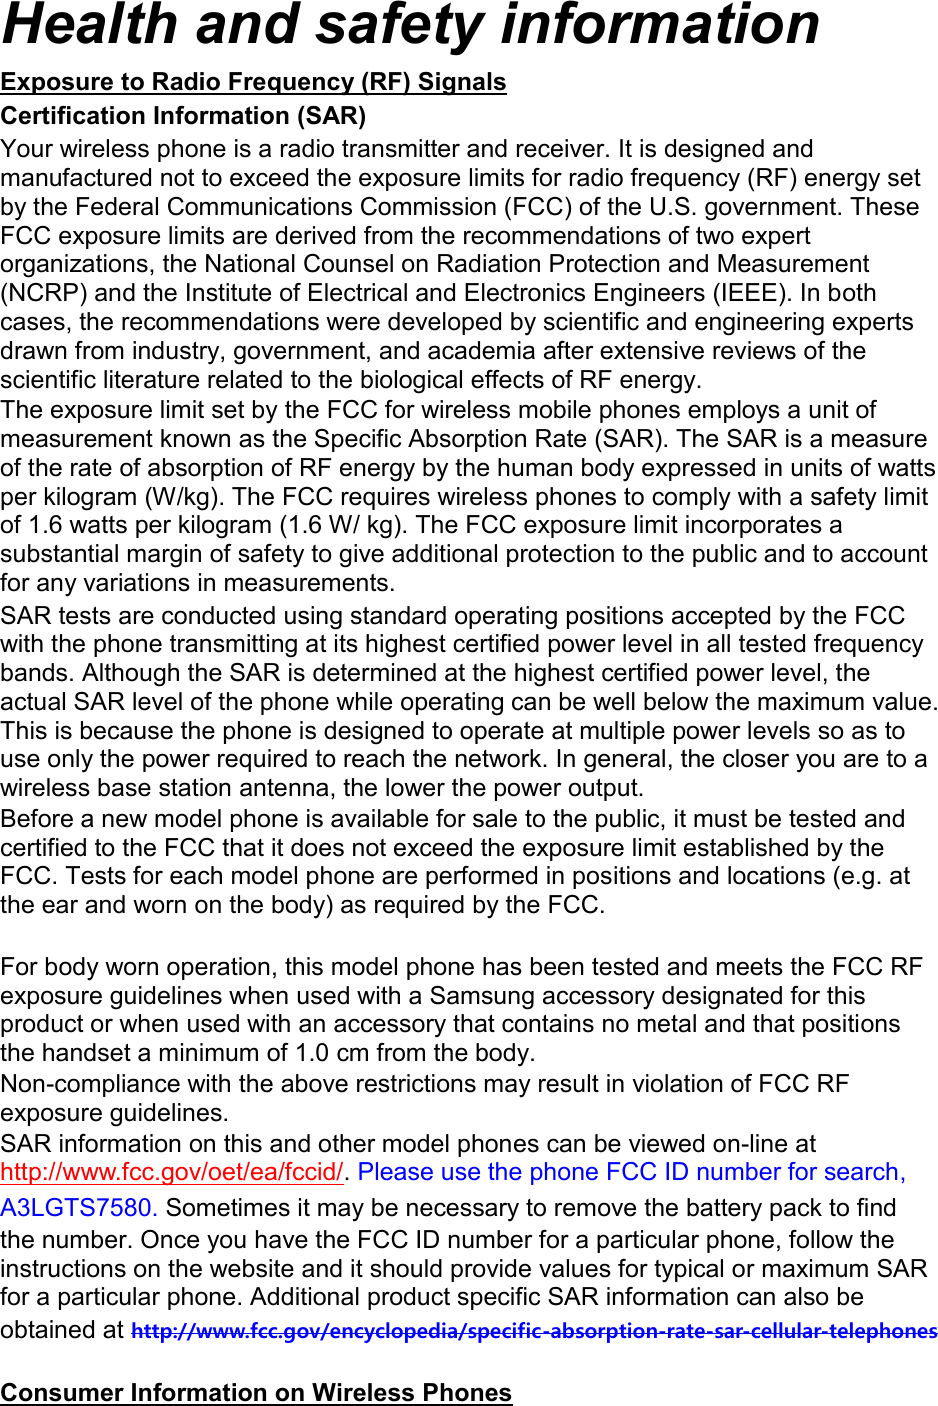 Health and safety information Exposure to Radio Frequency (RF) Signals Certification Information (SAR) Your wireless phone is a radio transmitter and receiver. It is designed and manufactured not to exceed the exposure limits for radio frequency (RF) energy set by the Federal Communications Commission (FCC) of the U.S. government. These FCC exposure limits are derived from the recommendations of two expert organizations, the National Counsel on Radiation Protection and Measurement (NCRP) and the Institute of Electrical and Electronics Engineers (IEEE). In both cases, the recommendations were developed by scientific and engineering experts drawn from industry, government, and academia after extensive reviews of the scientific literature related to the biological effects of RF energy. The exposure limit set by the FCC for wireless mobile phones employs a unit of measurement known as the Specific Absorption Rate (SAR). The SAR is a measure of the rate of absorption of RF energy by the human body expressed in units of watts per kilogram (W/kg). The FCC requires wireless phones to comply with a safety limit of 1.6 watts per kilogram (1.6 W/ kg). The FCC exposure limit incorporates a substantial margin of safety to give additional protection to the public and to account for any variations in measurements. SAR tests are conducted using standard operating positions accepted by the FCC with the phone transmitting at its highest certified power level in all tested frequency bands. Although the SAR is determined at the highest certified power level, the actual SAR level of the phone while operating can be well below the maximum value. This is because the phone is designed to operate at multiple power levels so as to use only the power required to reach the network. In general, the closer you are to a wireless base station antenna, the lower the power output. Before a new model phone is available for sale to the public, it must be tested and certified to the FCC that it does not exceed the exposure limit established by the FCC. Tests for each model phone are performed in positions and locations (e.g. at the ear and worn on the body) as required by the FCC.      For body worn operation, this model phone has been tested and meets the FCC RF exposure guidelines when used with a Samsung accessory designated for this product or when used with an accessory that contains no metal and that positions the handset a minimum of 1.0 cm from the body.   Non-compliance with the above restrictions may result in violation of FCC RF exposure guidelines. SAR information on this and other model phones can be viewed on-line at http://www.fcc.gov/oet/ea/fccid/. Please use the phone FCC ID number for search, A3LGTS7580. Sometimes it may be necessary to remove the battery pack to find the number. Once you have the FCC ID number for a particular phone, follow the instructions on the website and it should provide values for typical or maximum SAR for a particular phone. Additional product specific SAR information can also be obtained at http://www.fcc.gov/encyclopedia/specific-absorption-rate-sar-cellular-telephones  Consumer Information on Wireless Phones 